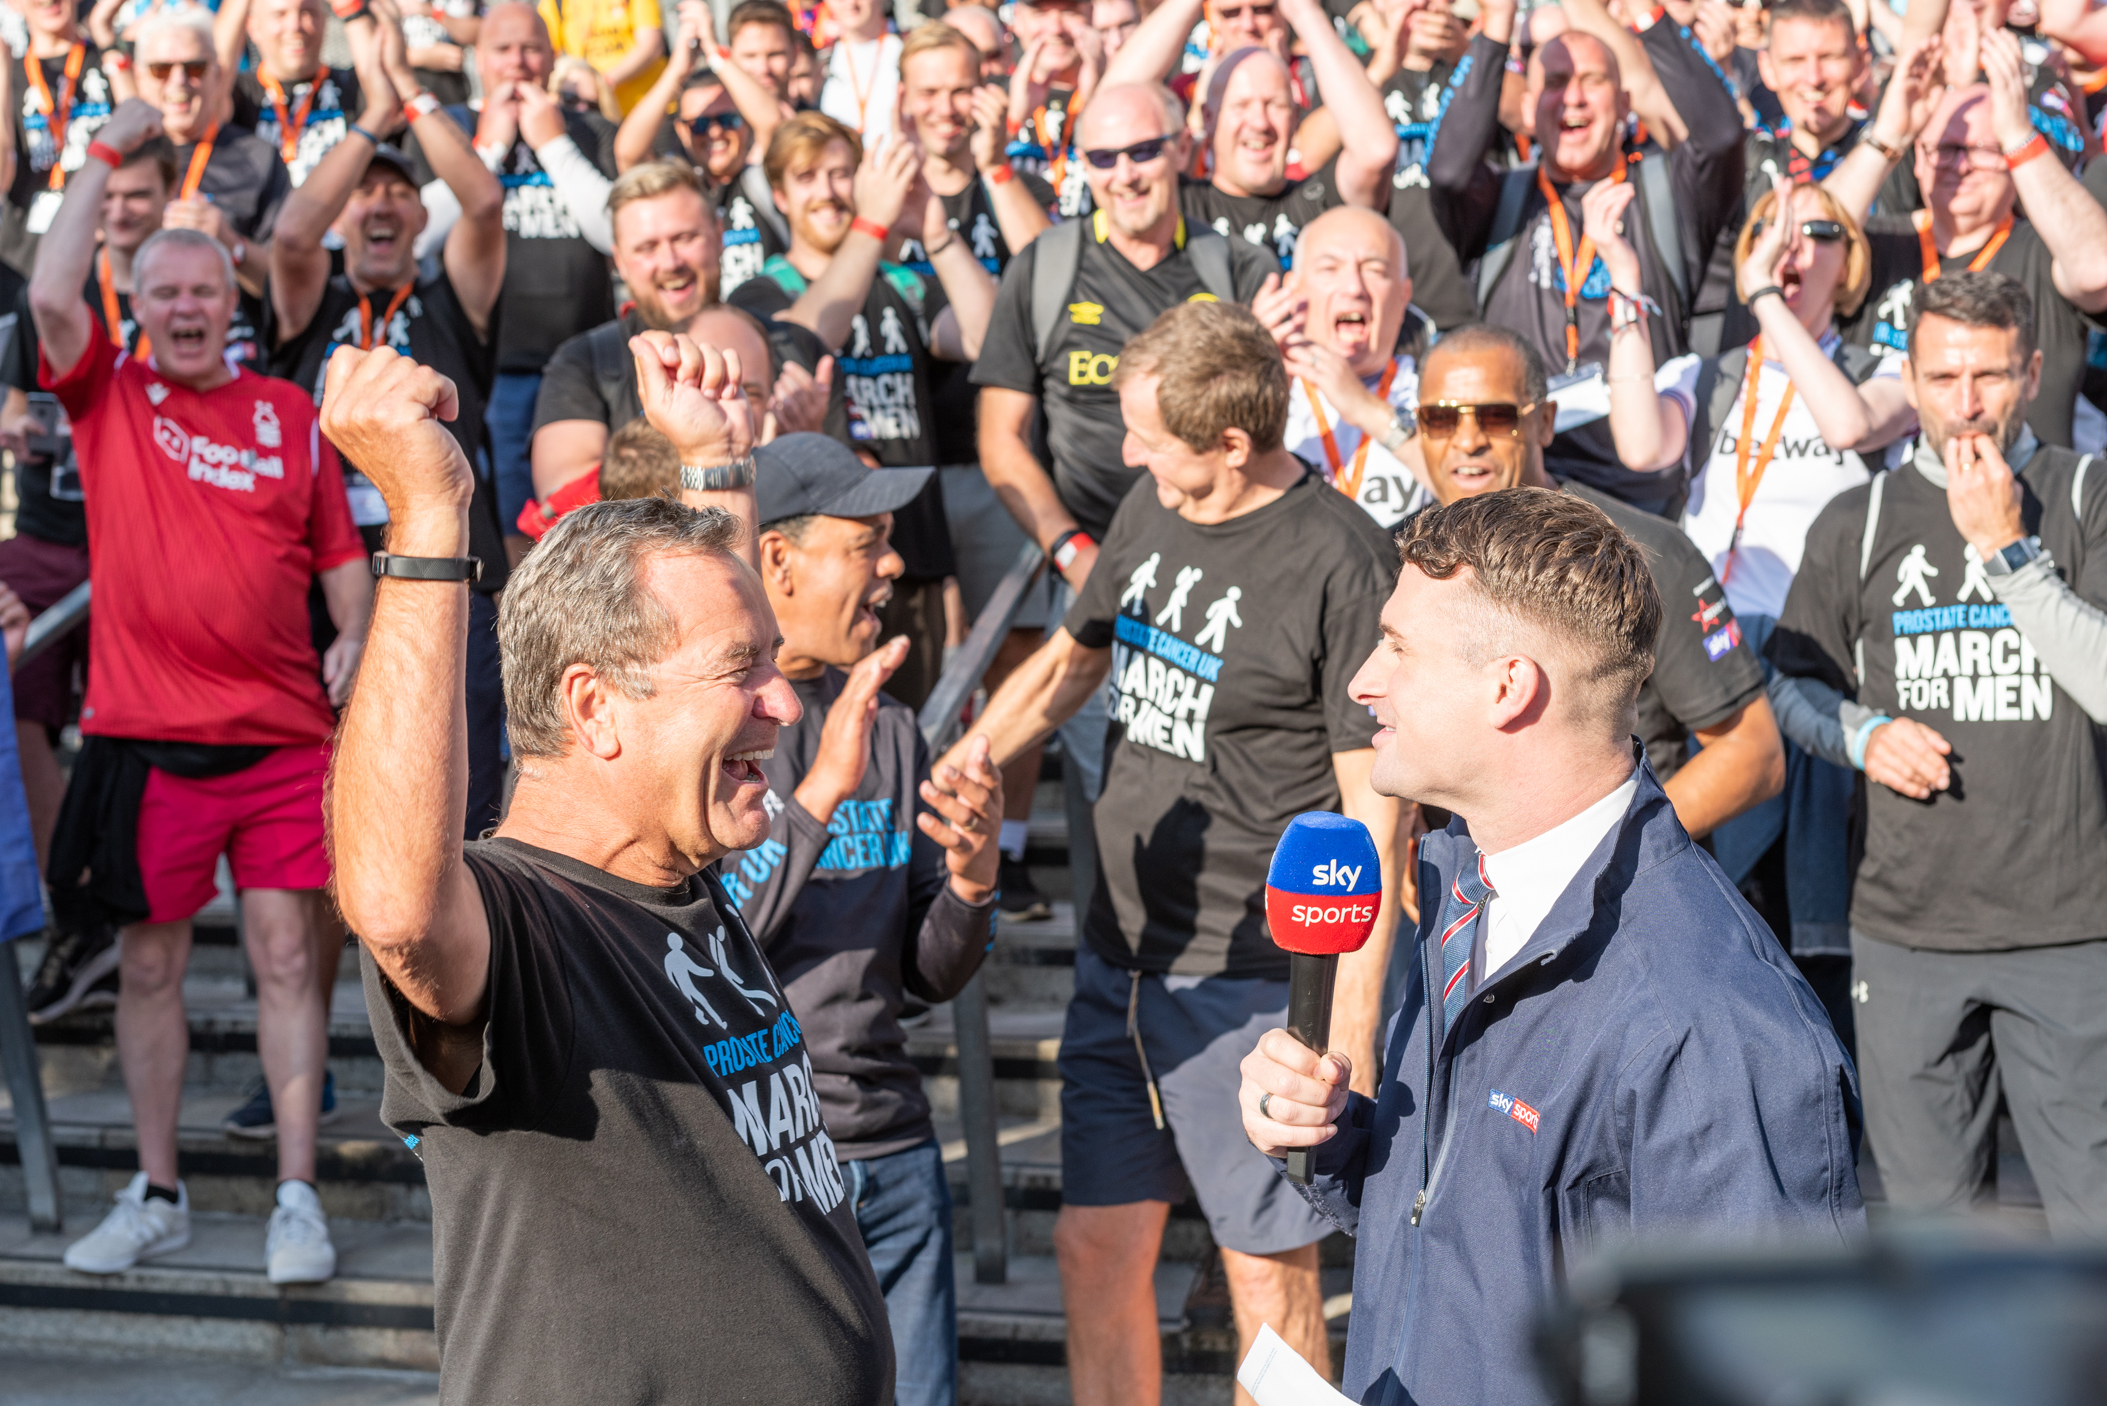 Jeff Stelling celebrates a Prostate Cancer fundraising goal being reached